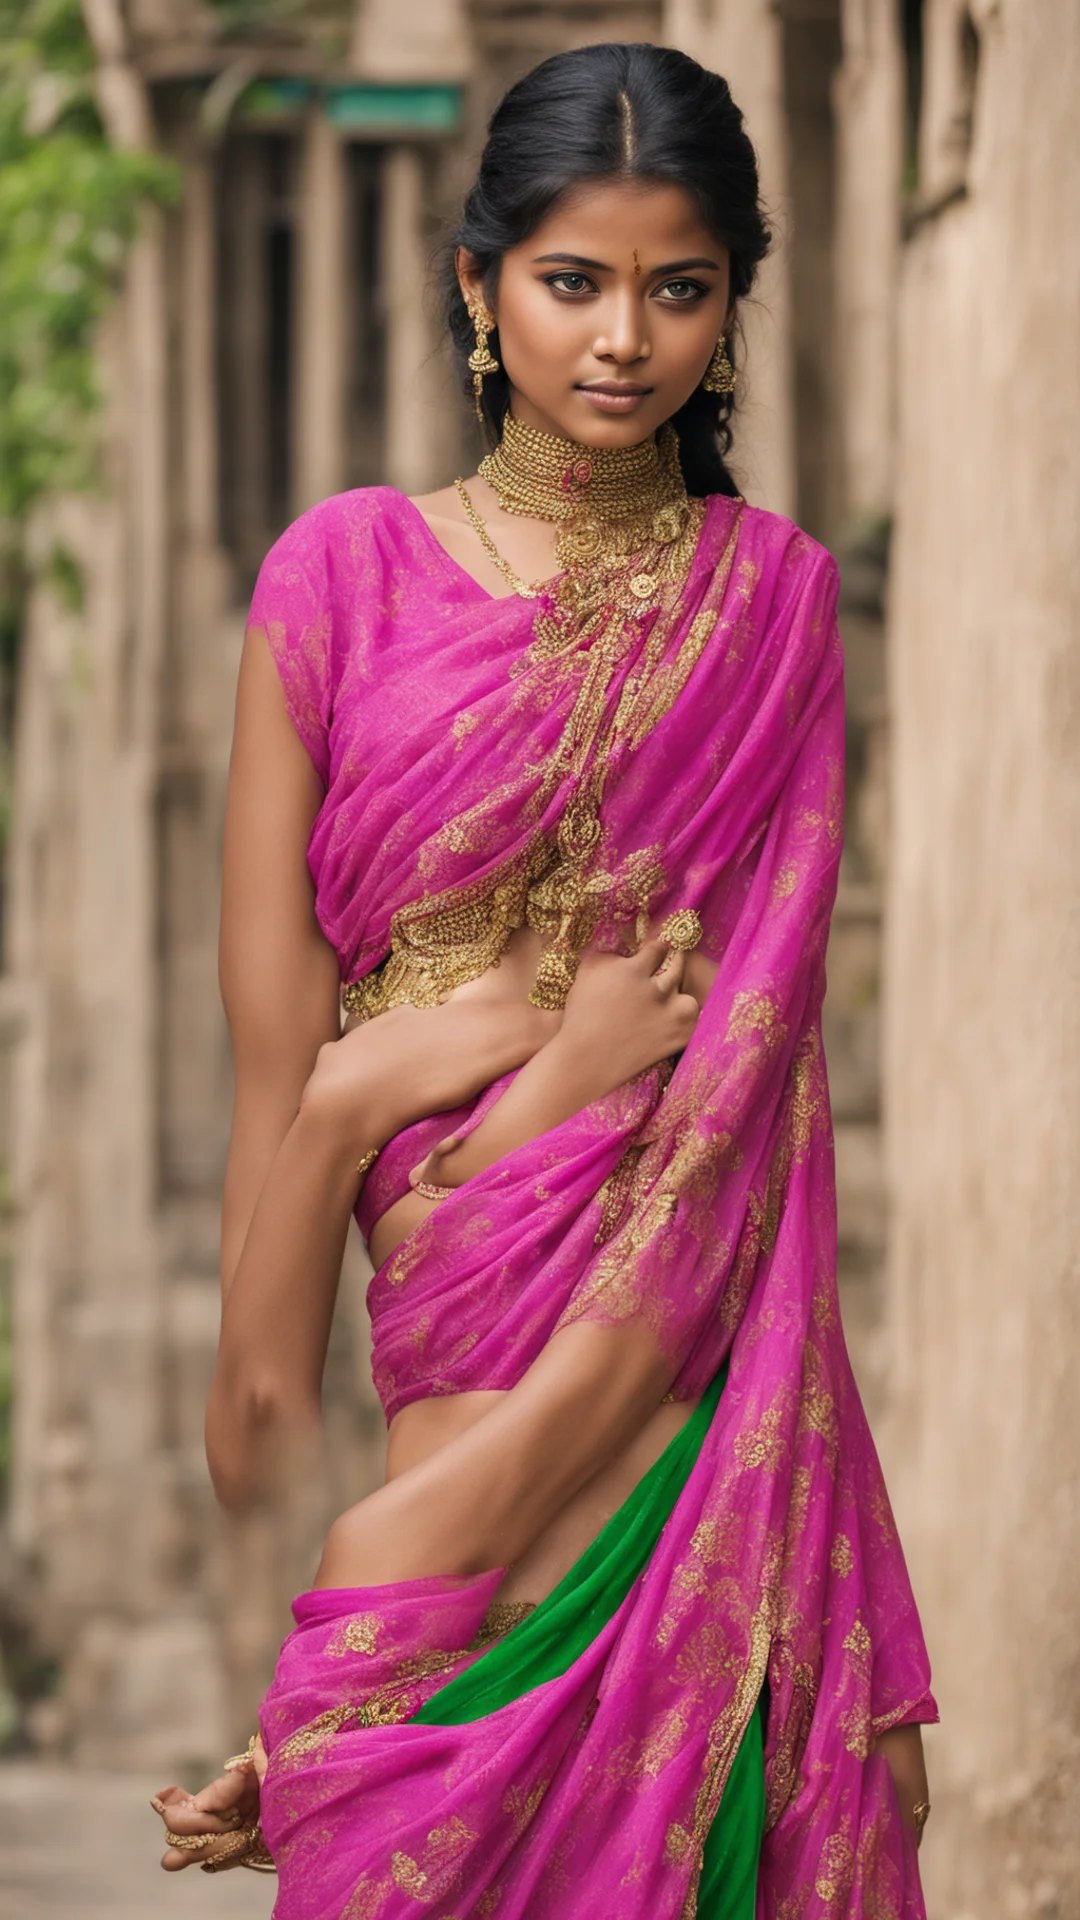 indian girl in saree amazing awesome portrait 2 tall